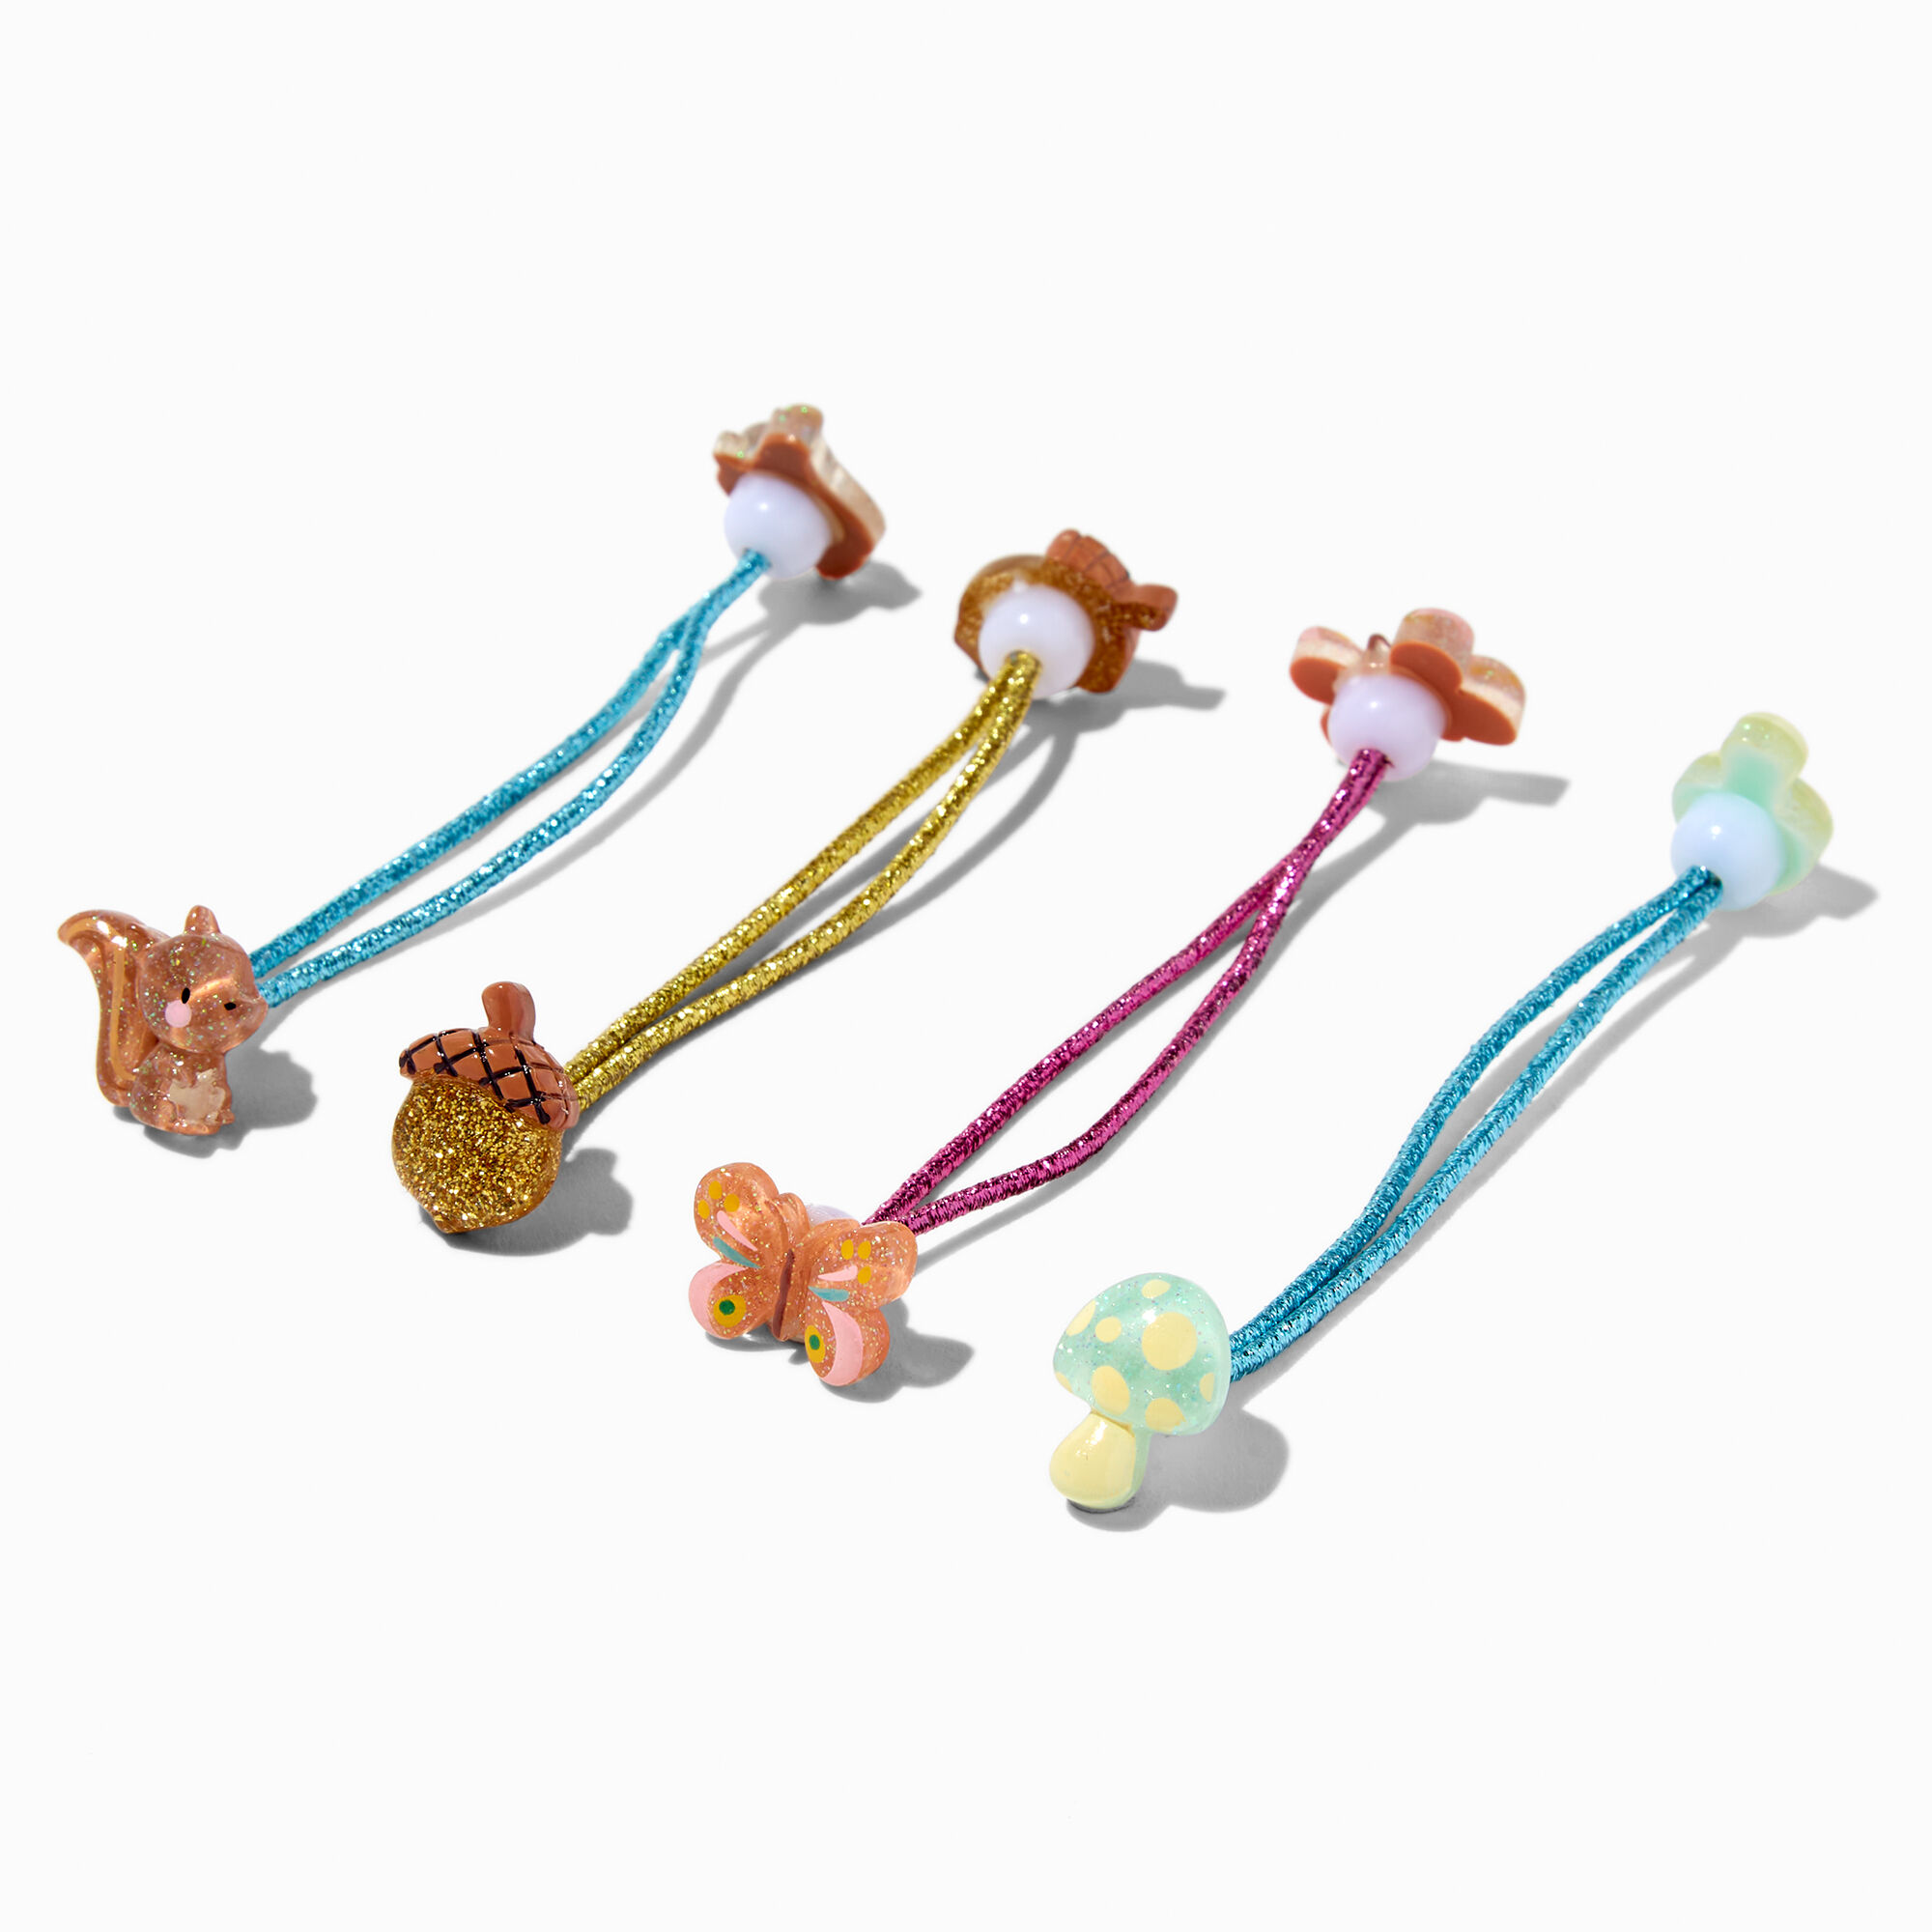 View Claires Club Woodland Critters Hair Ties 4 Pack information